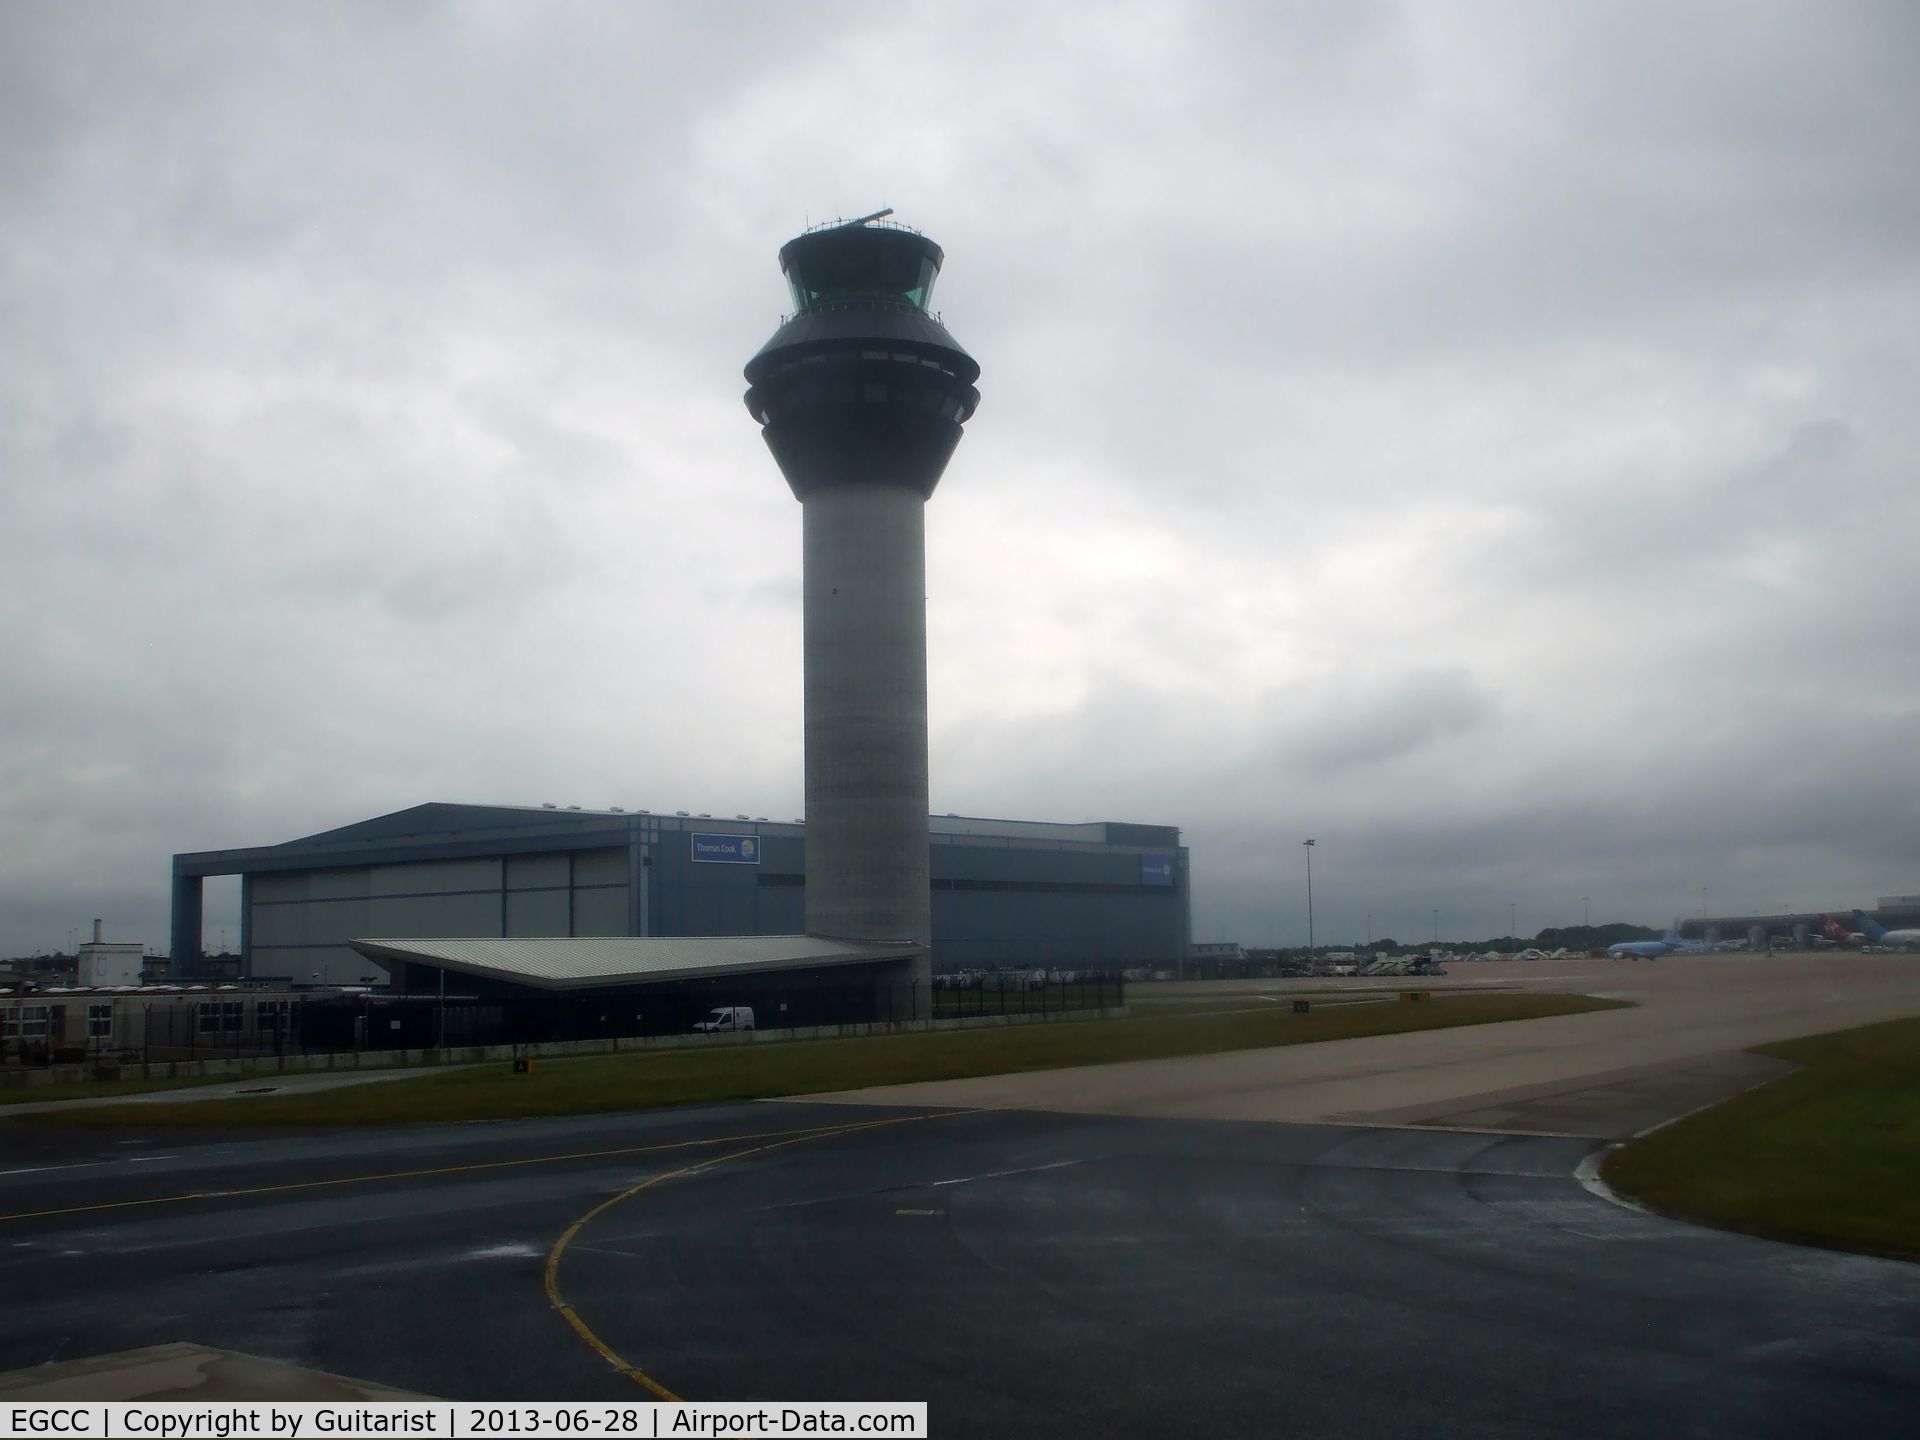 Manchester Airport, Manchester, England United Kingdom (EGCC) - Back in Manchester and its raining 